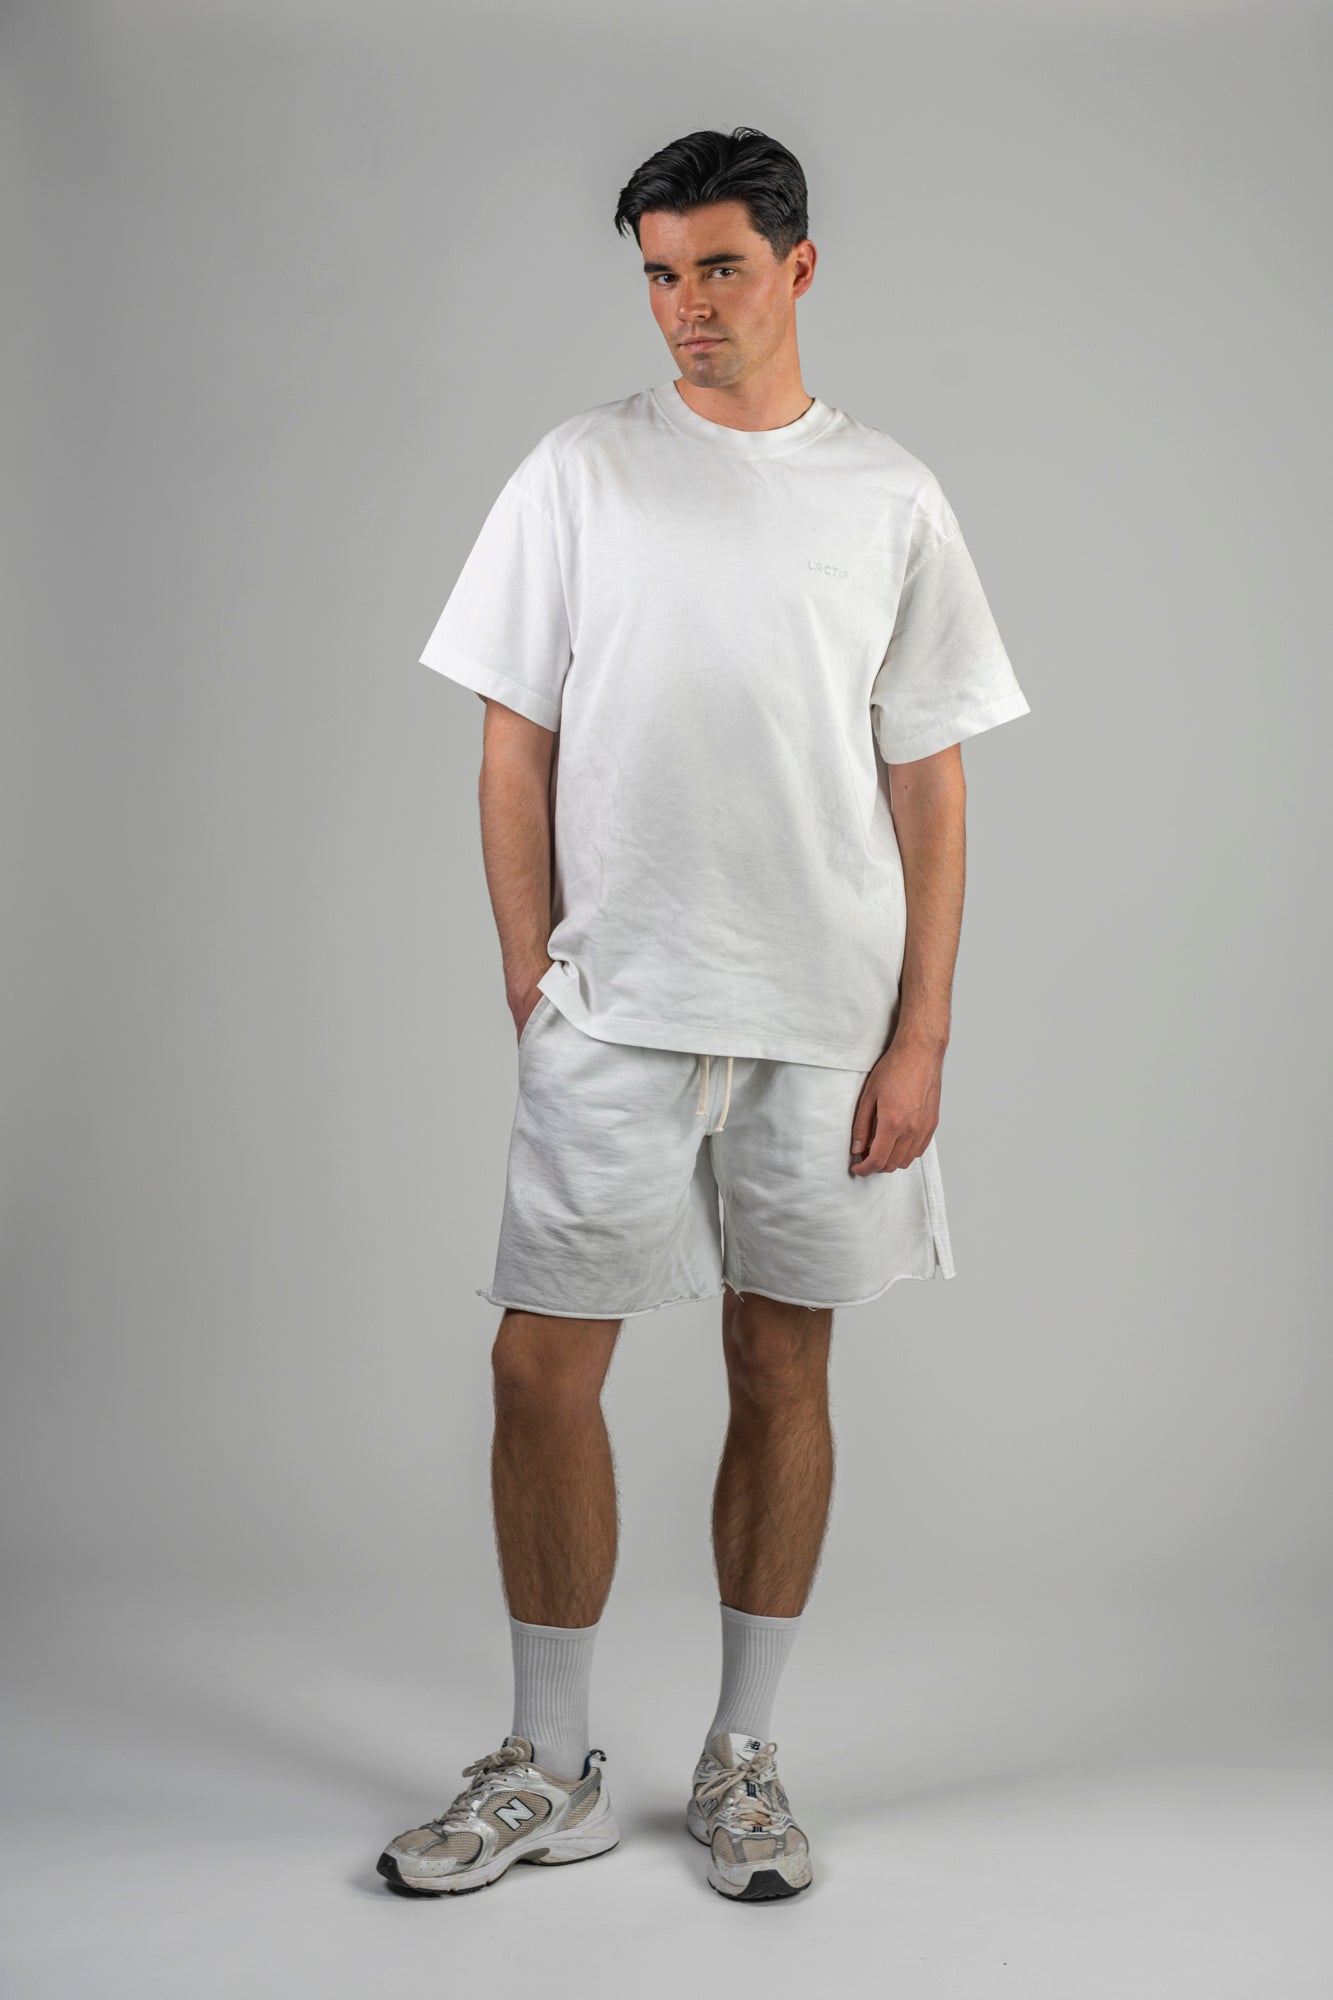 white-tshirt-male-front